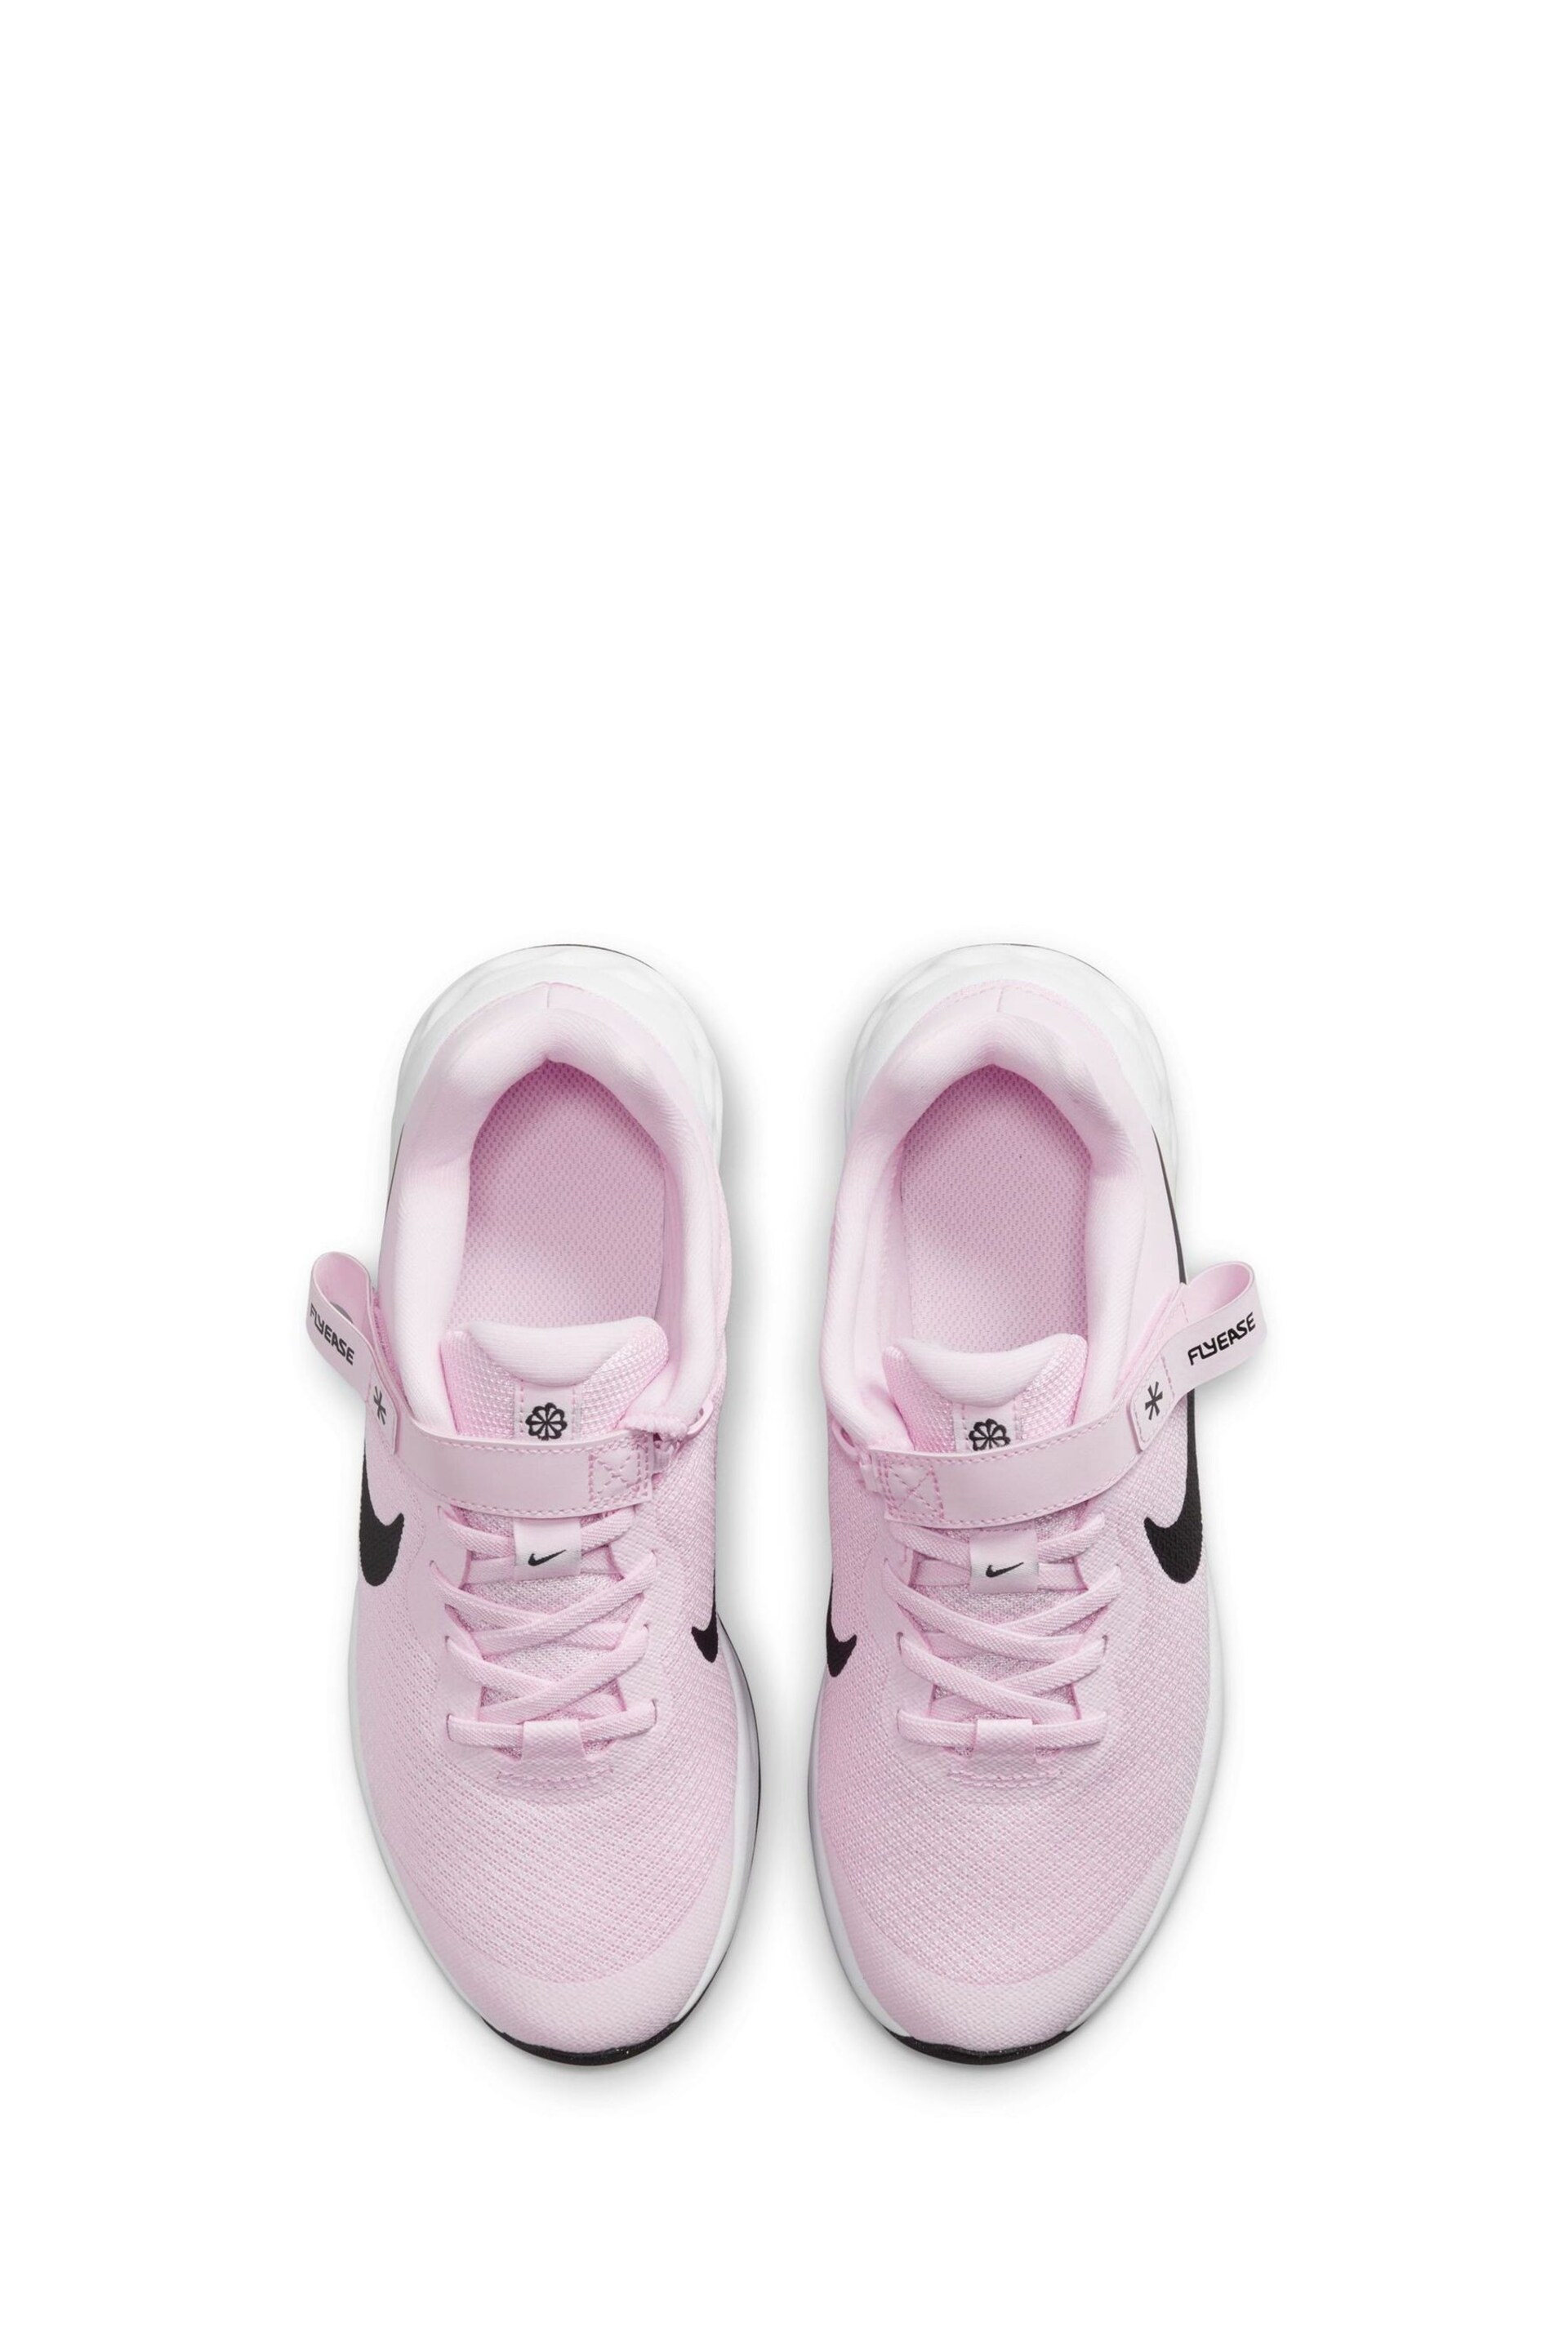 Nike Pink Revolution 6 FlyEase Easy On/Off Trainers - Image 7 of 10